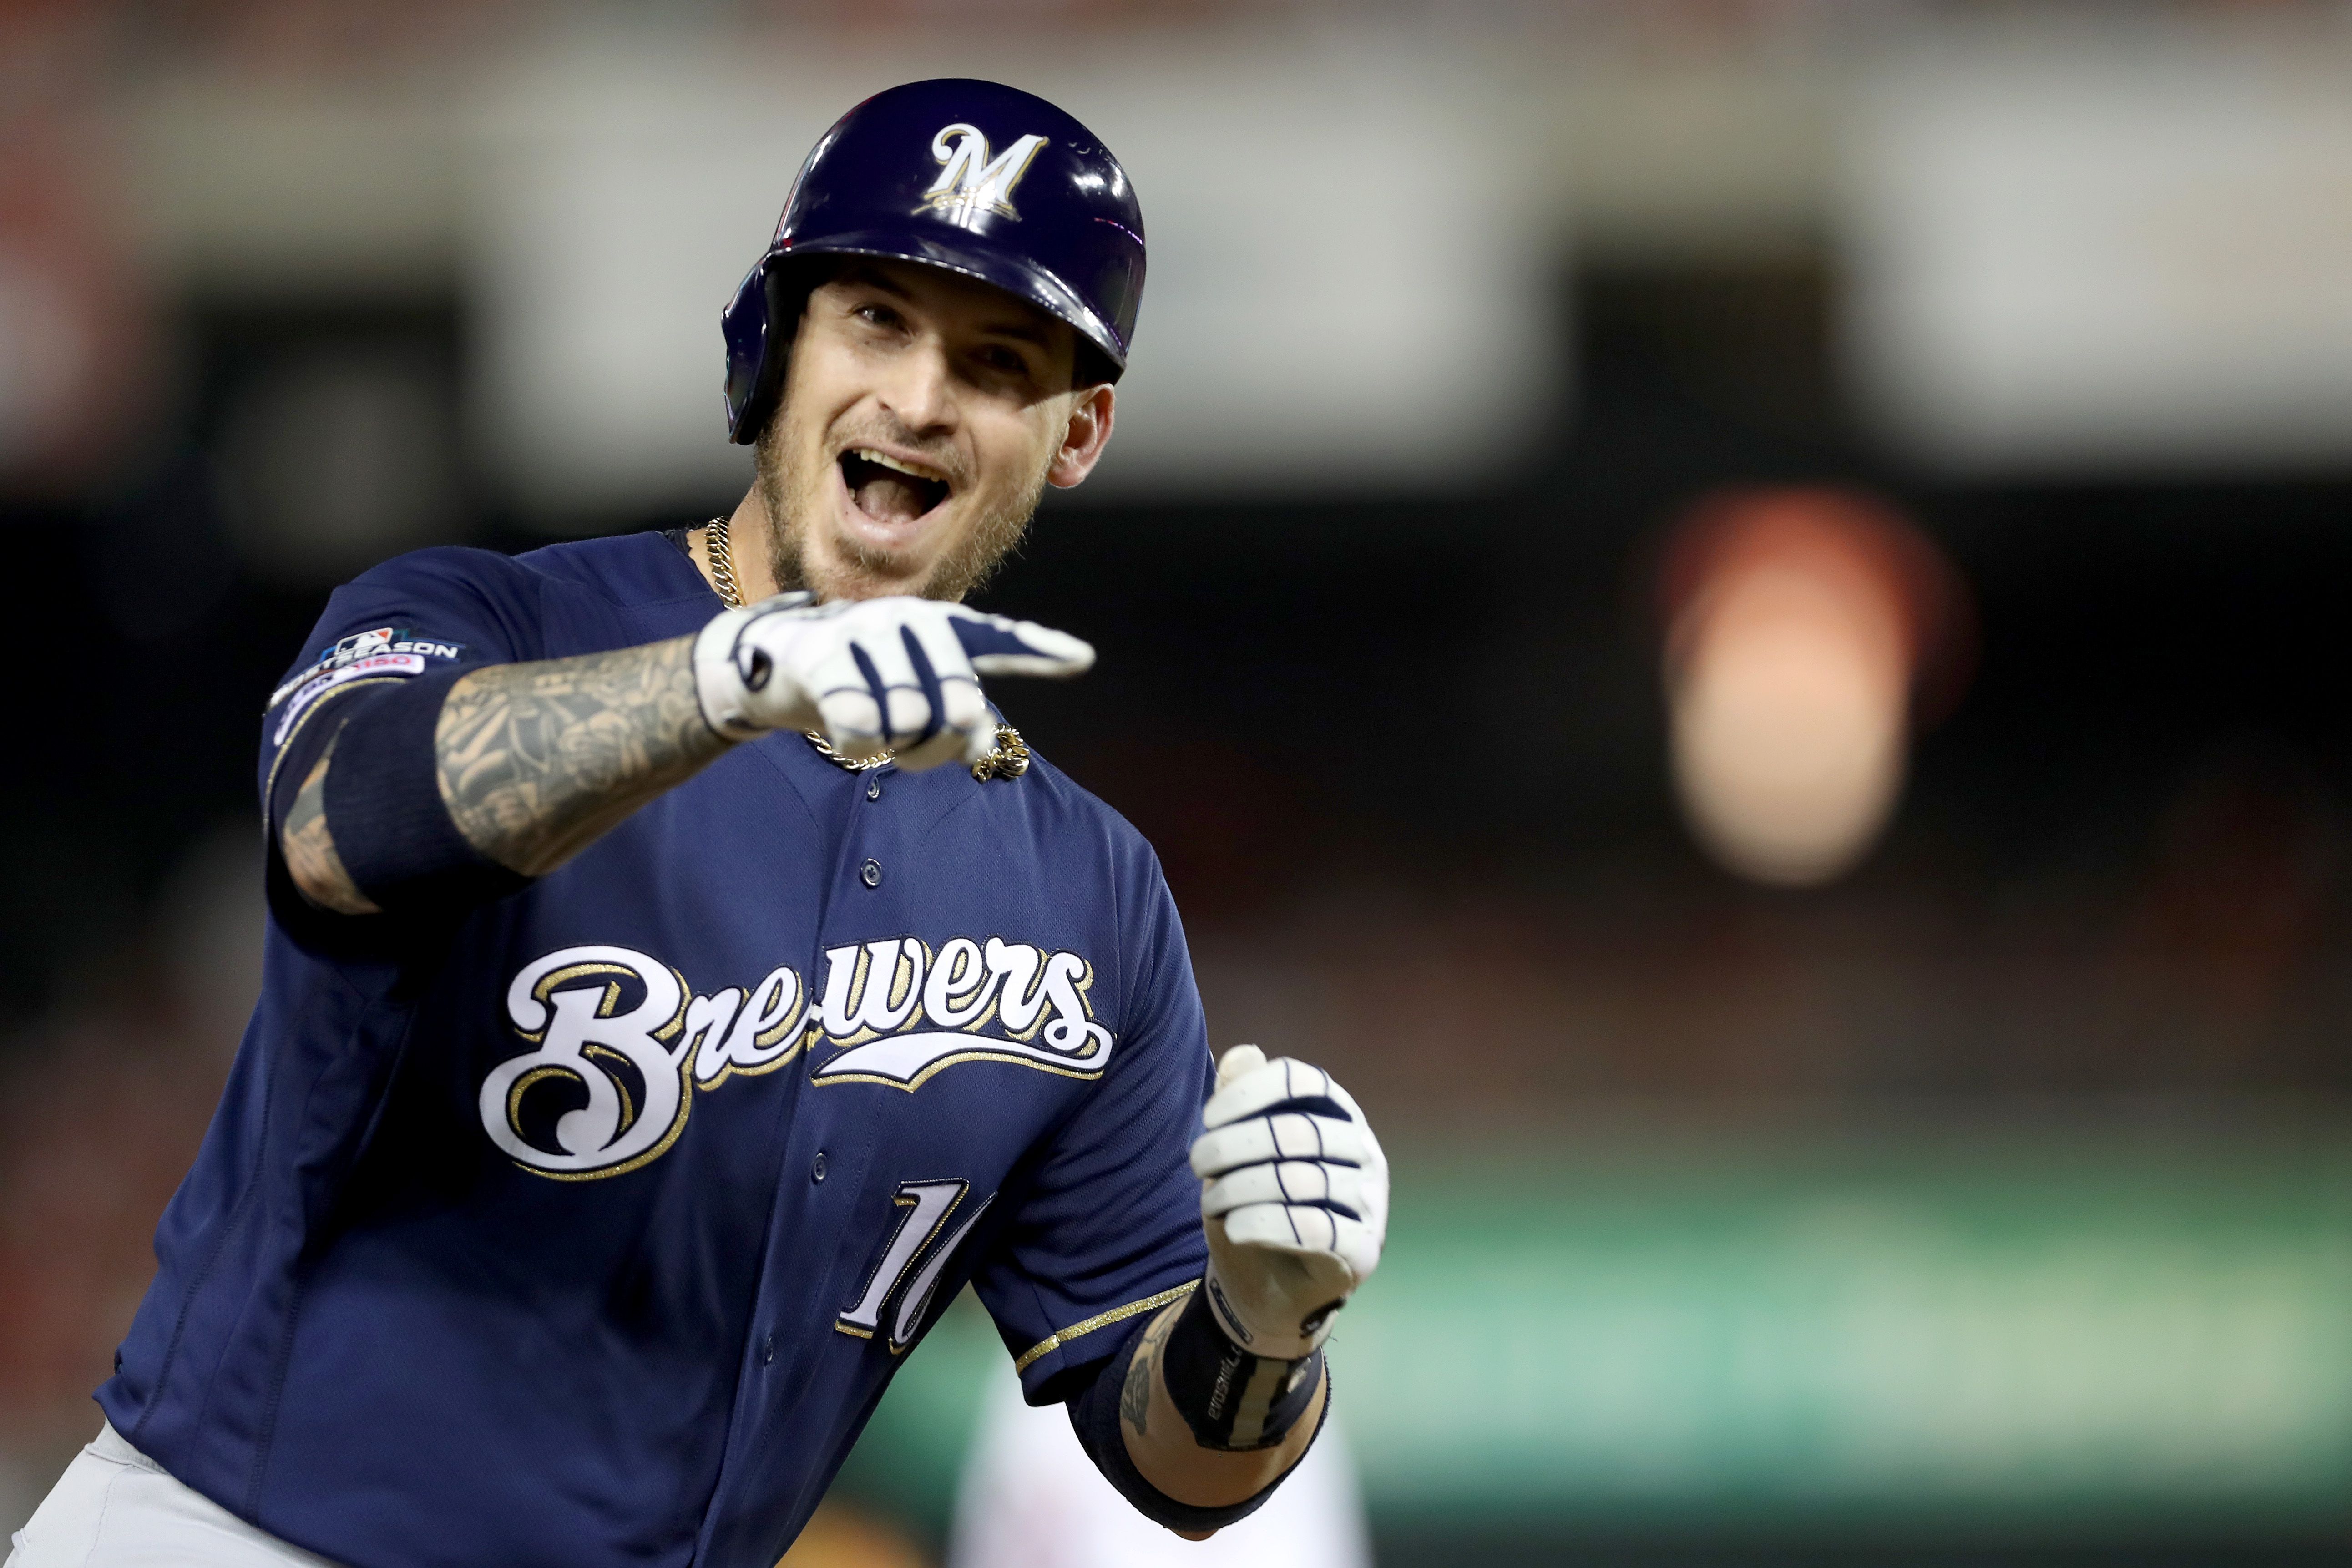 Yasmani Grandal: Get to know the new Chicago White Sox catcher